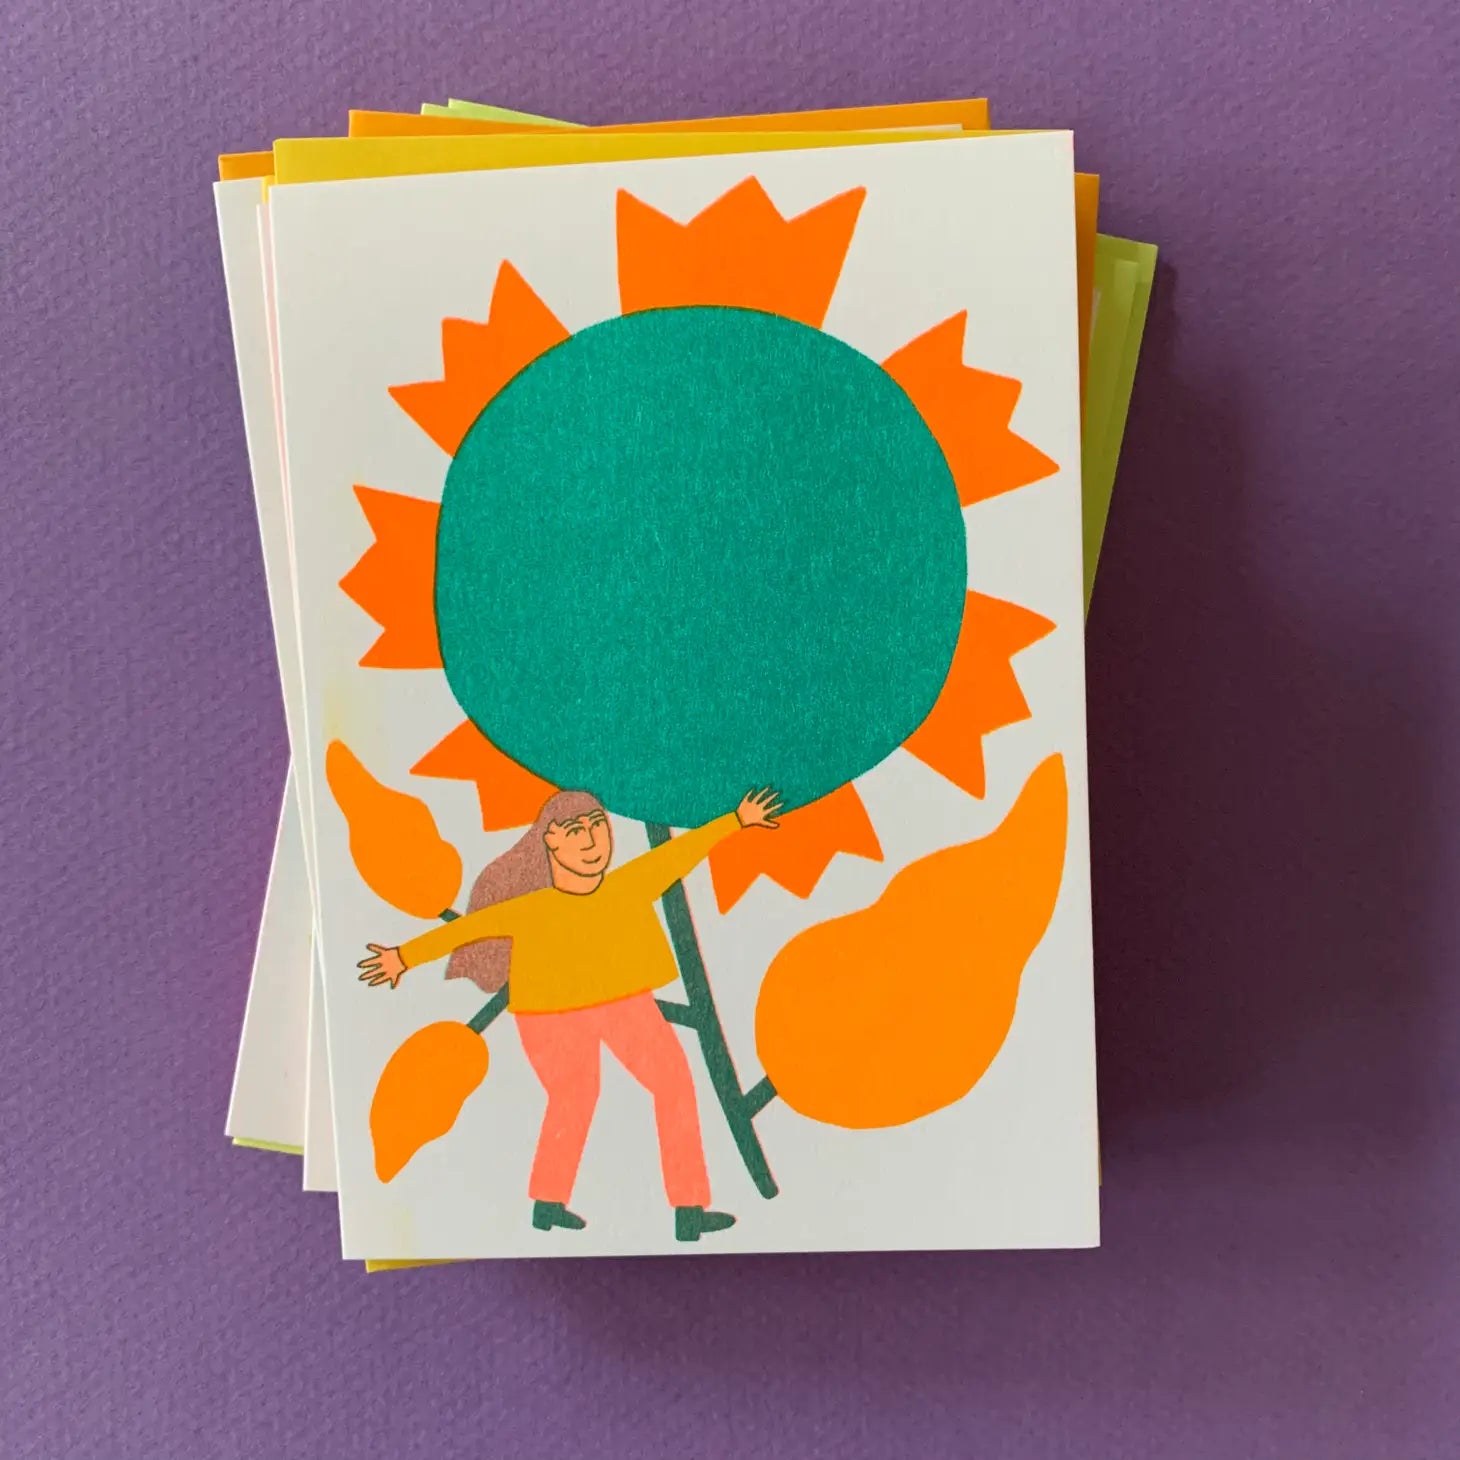 Sunflower Blooming - Risograph Printed Greeting Card